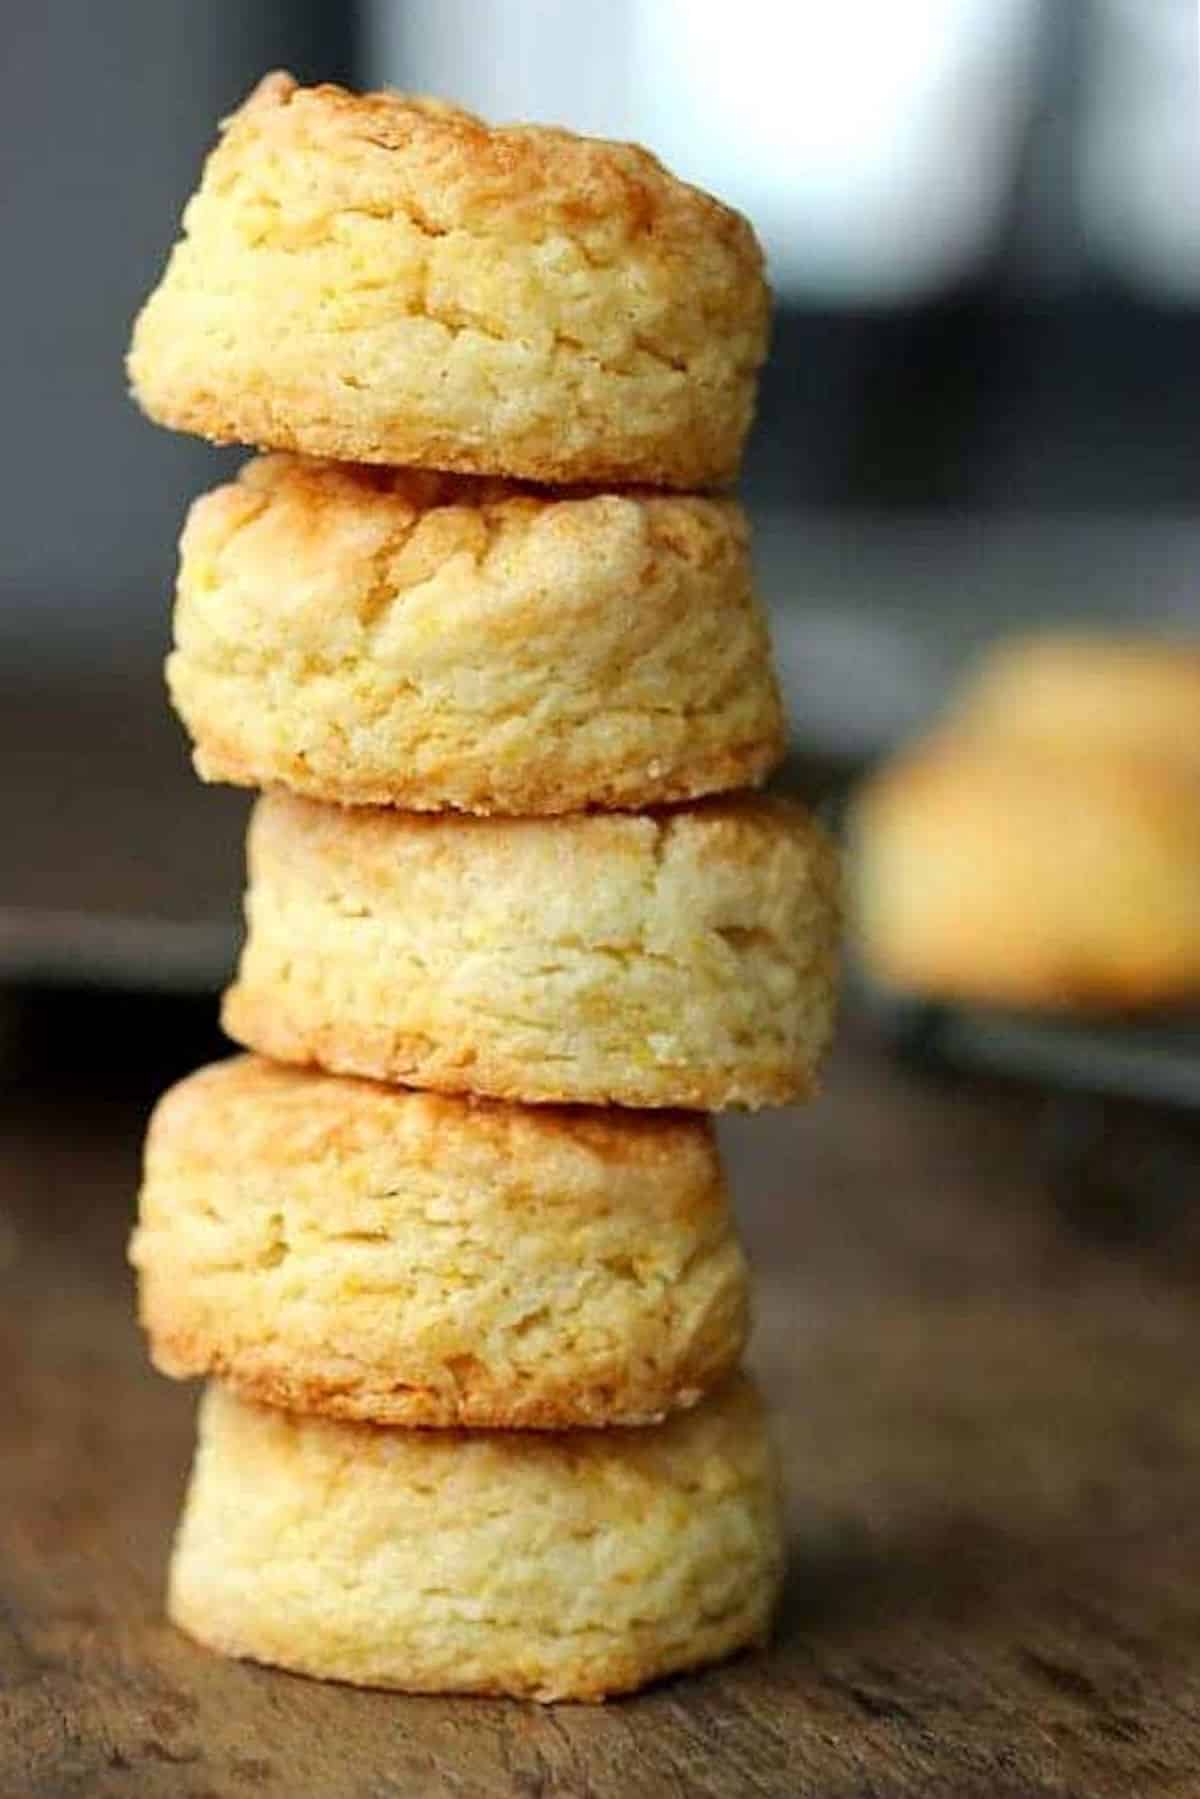 Wooden surface with stack of baked scones.